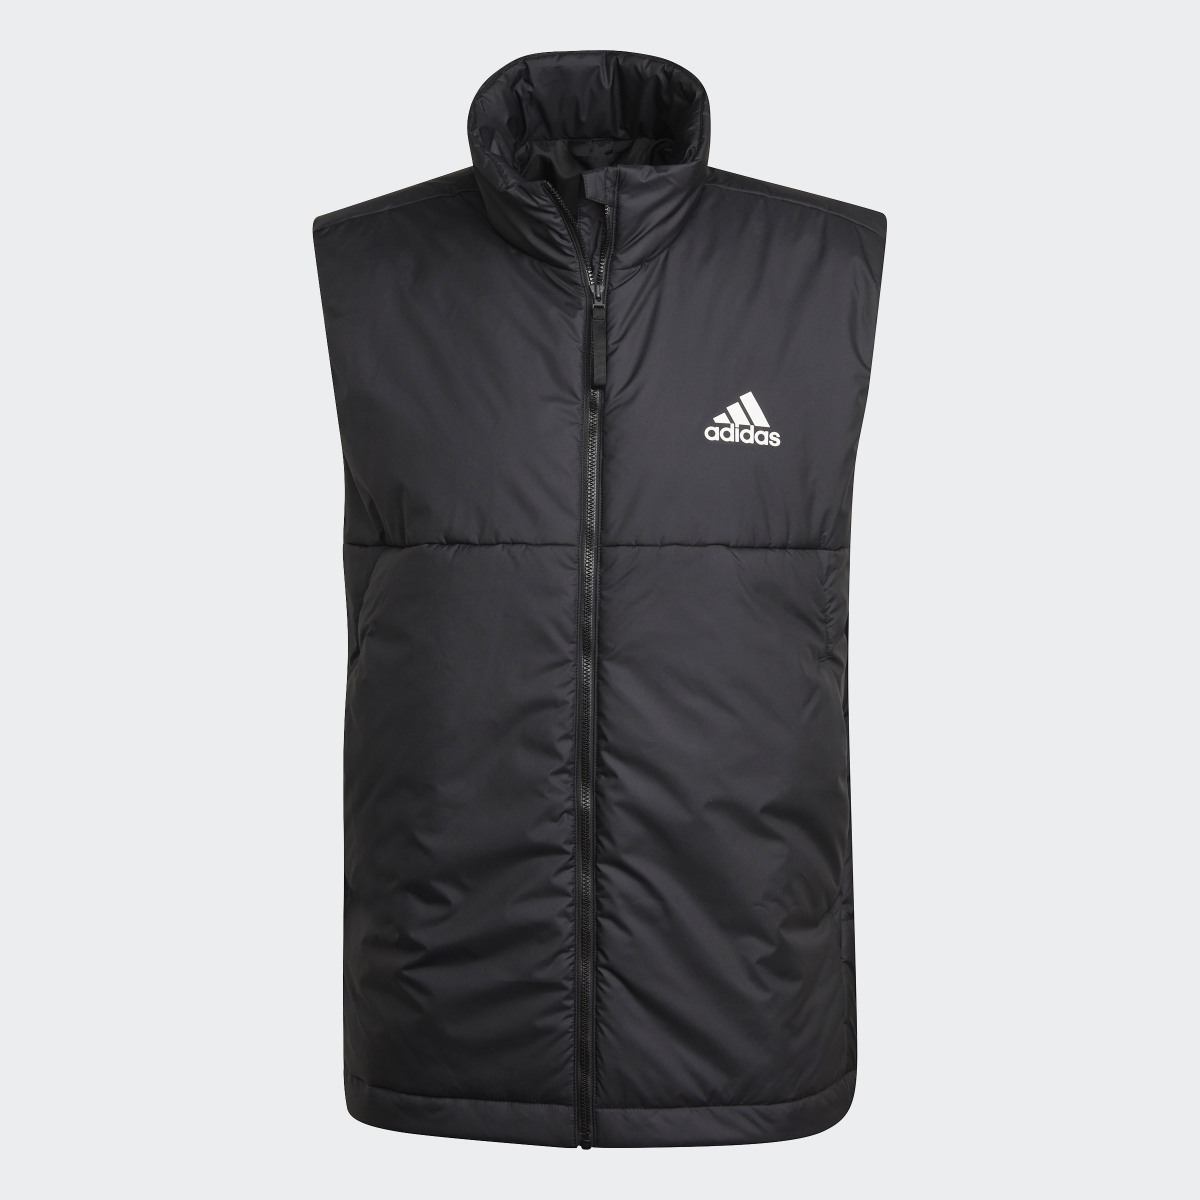 Adidas 3-Stripes Insulated Vest. 5